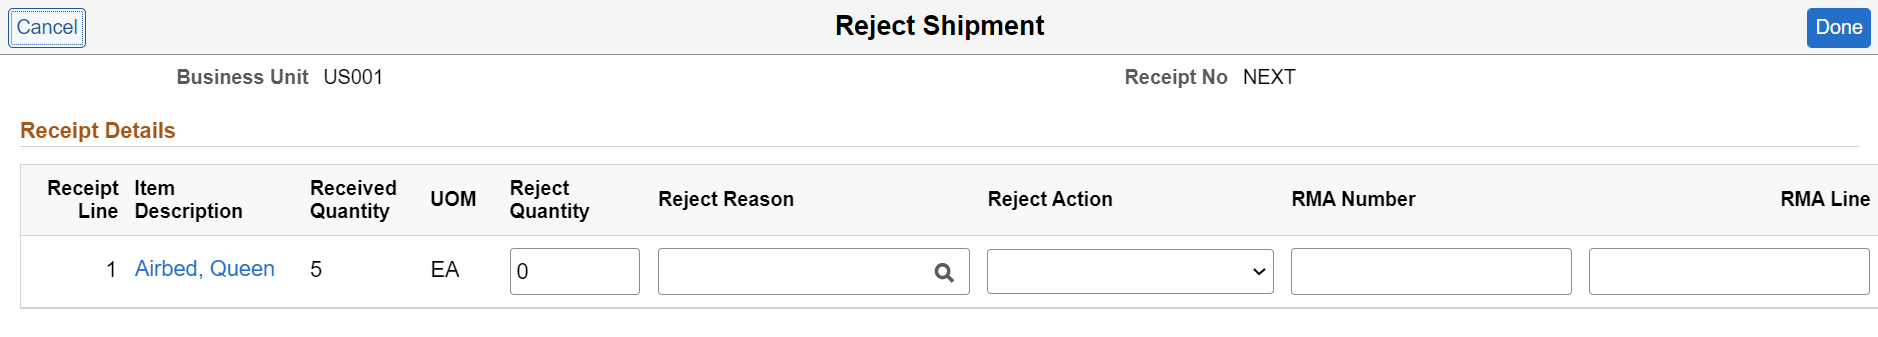 Reject Shipment